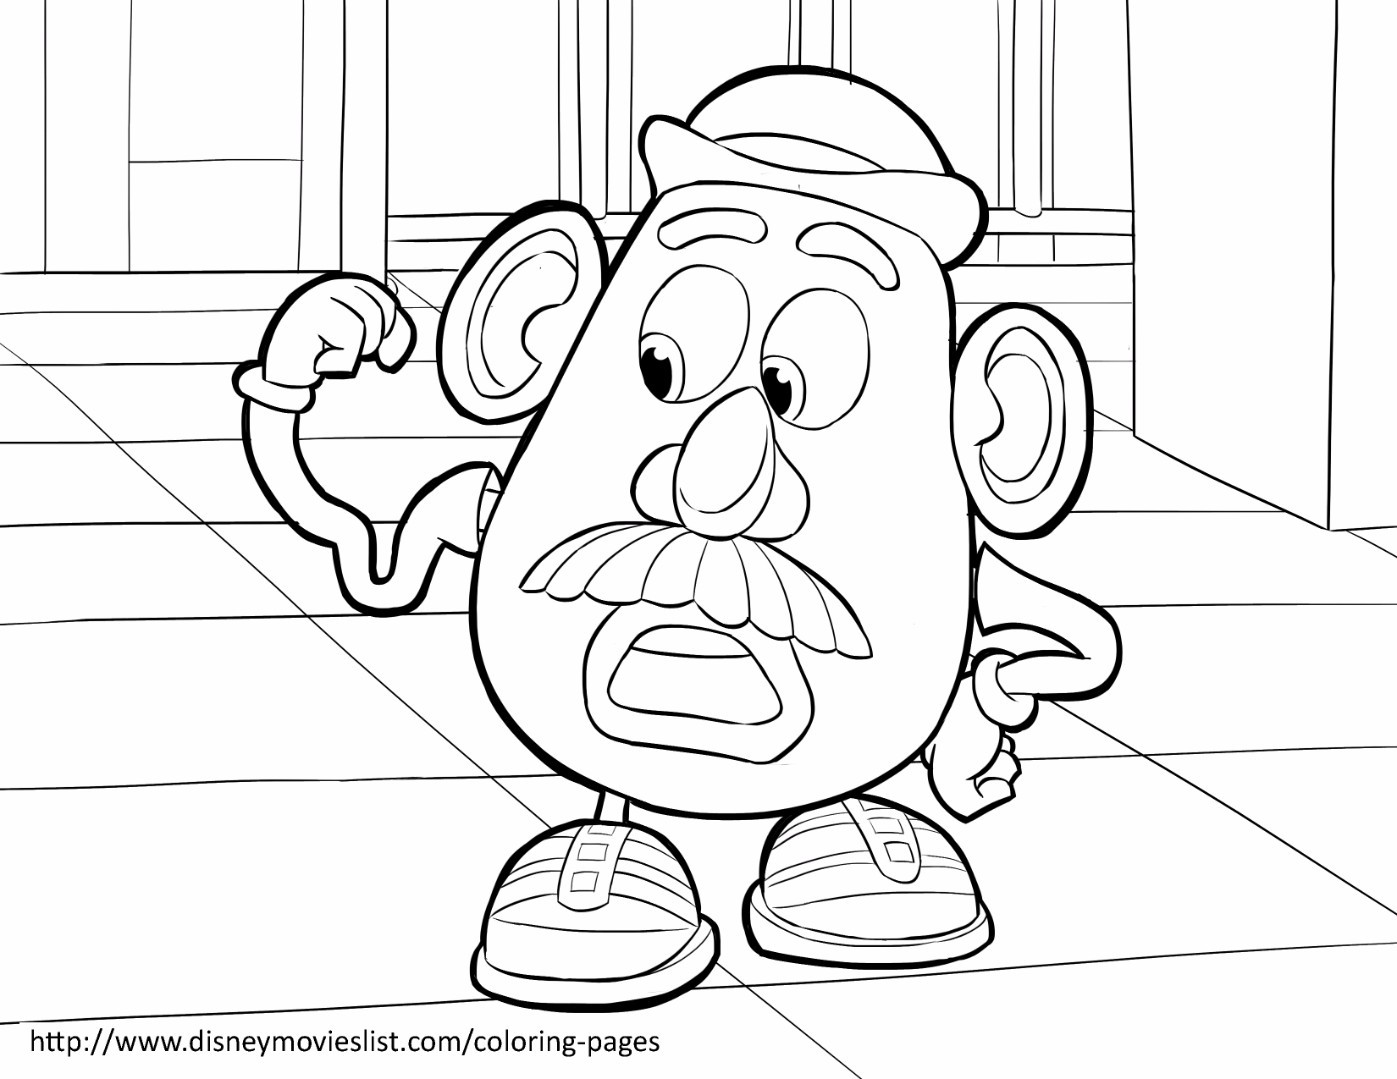 Best ideas about Free Coloring Sheets For Kids Kate Dicamillo Stories
. Save or Pin Mr potato head coloring pages Now.